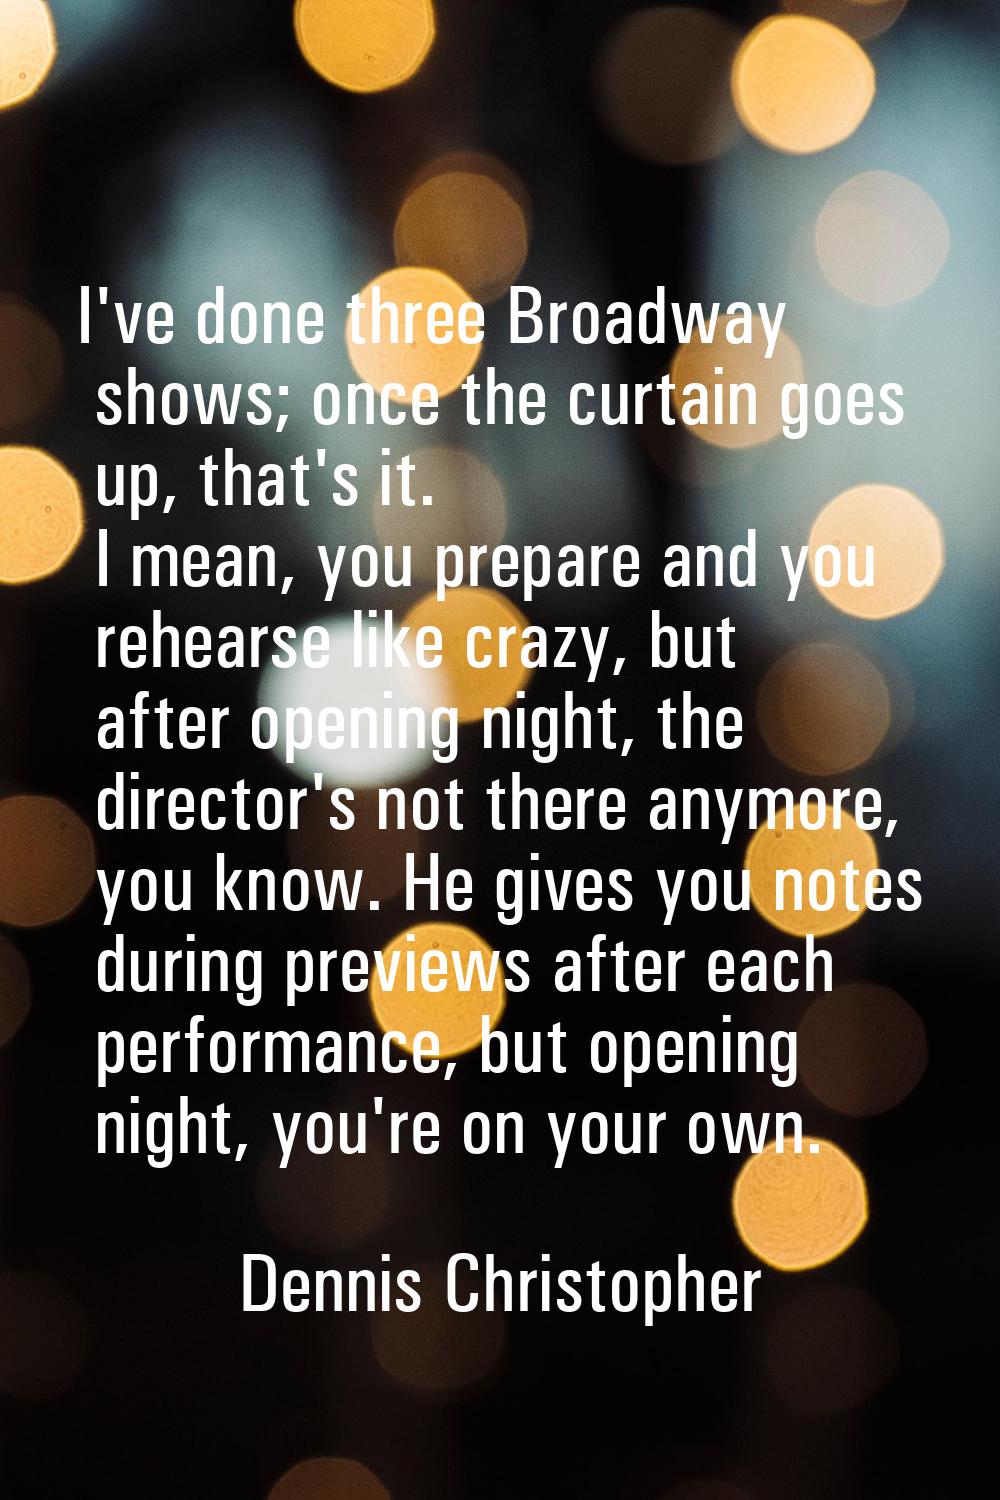 I've done three Broadway shows; once the curtain goes up, that's it. I mean, you prepare and you re